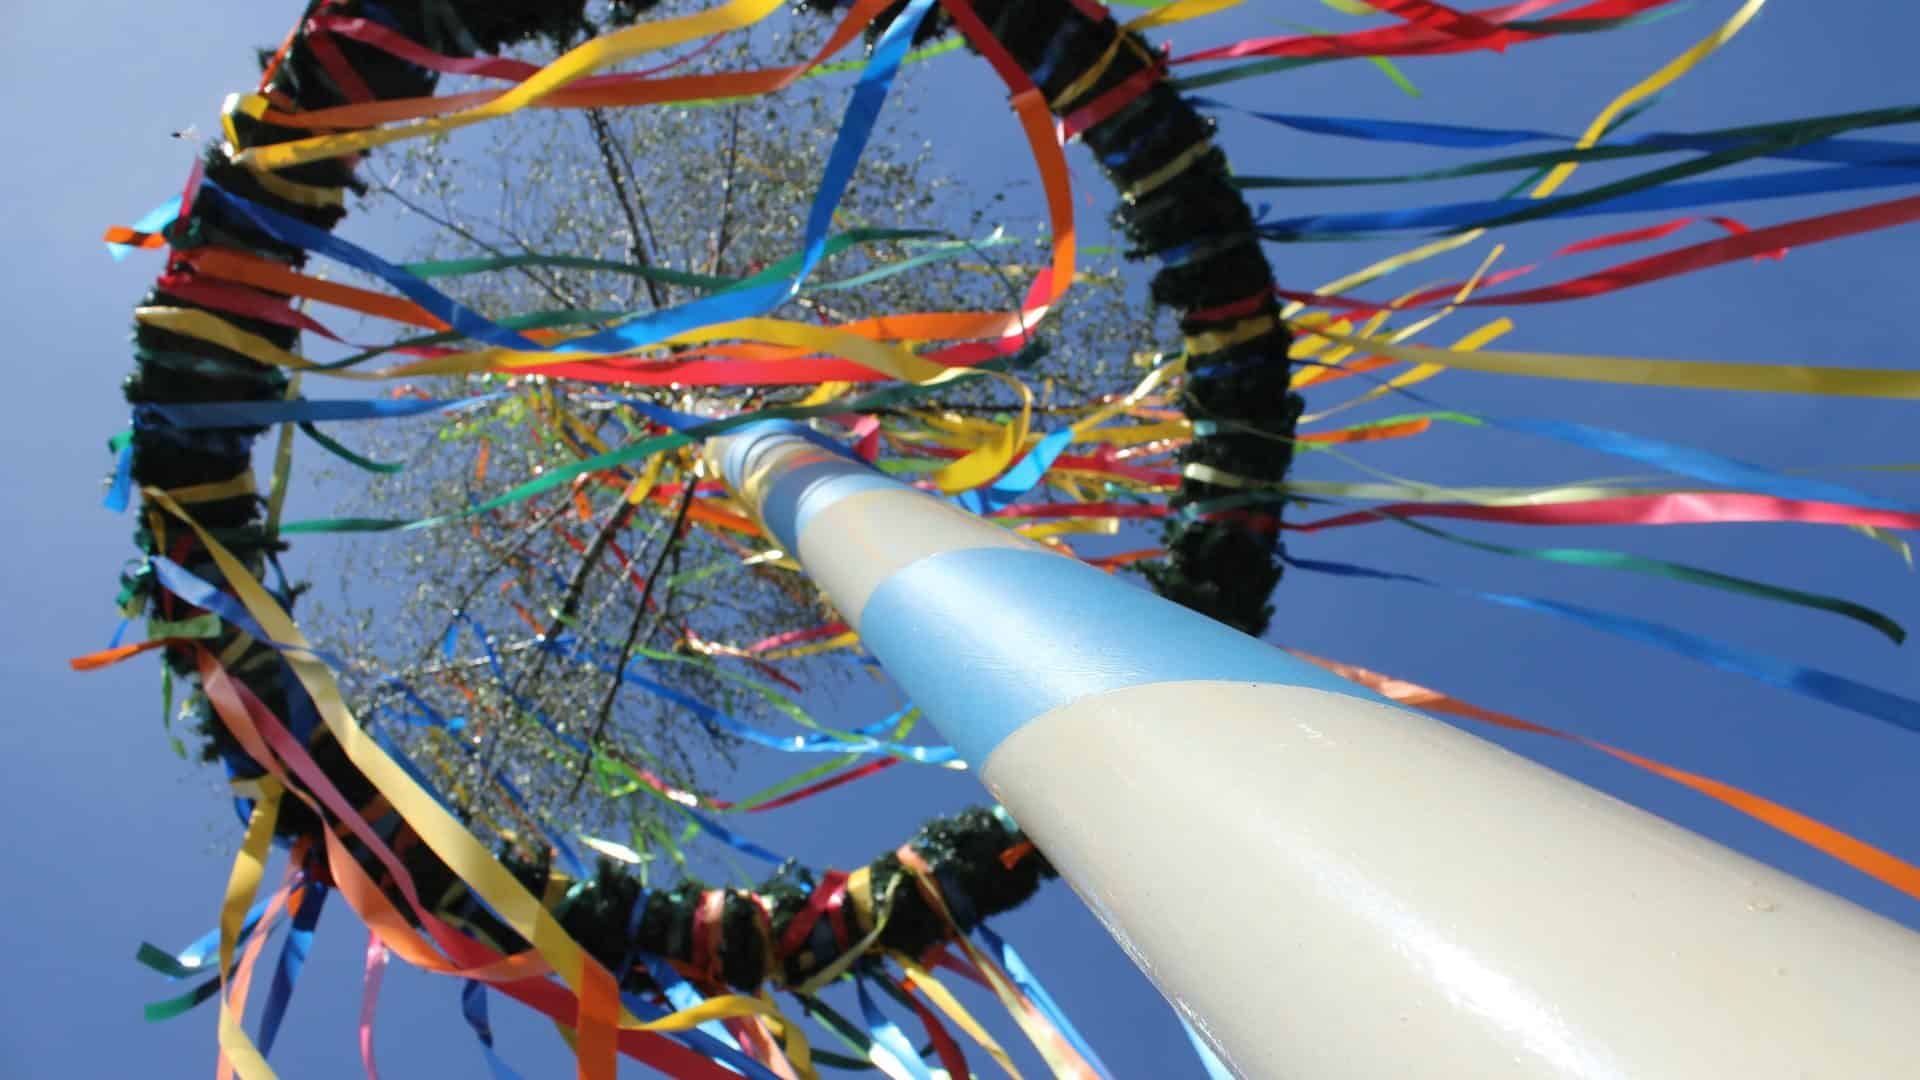 White maypole with colorful streamers hanging down against a blue sky